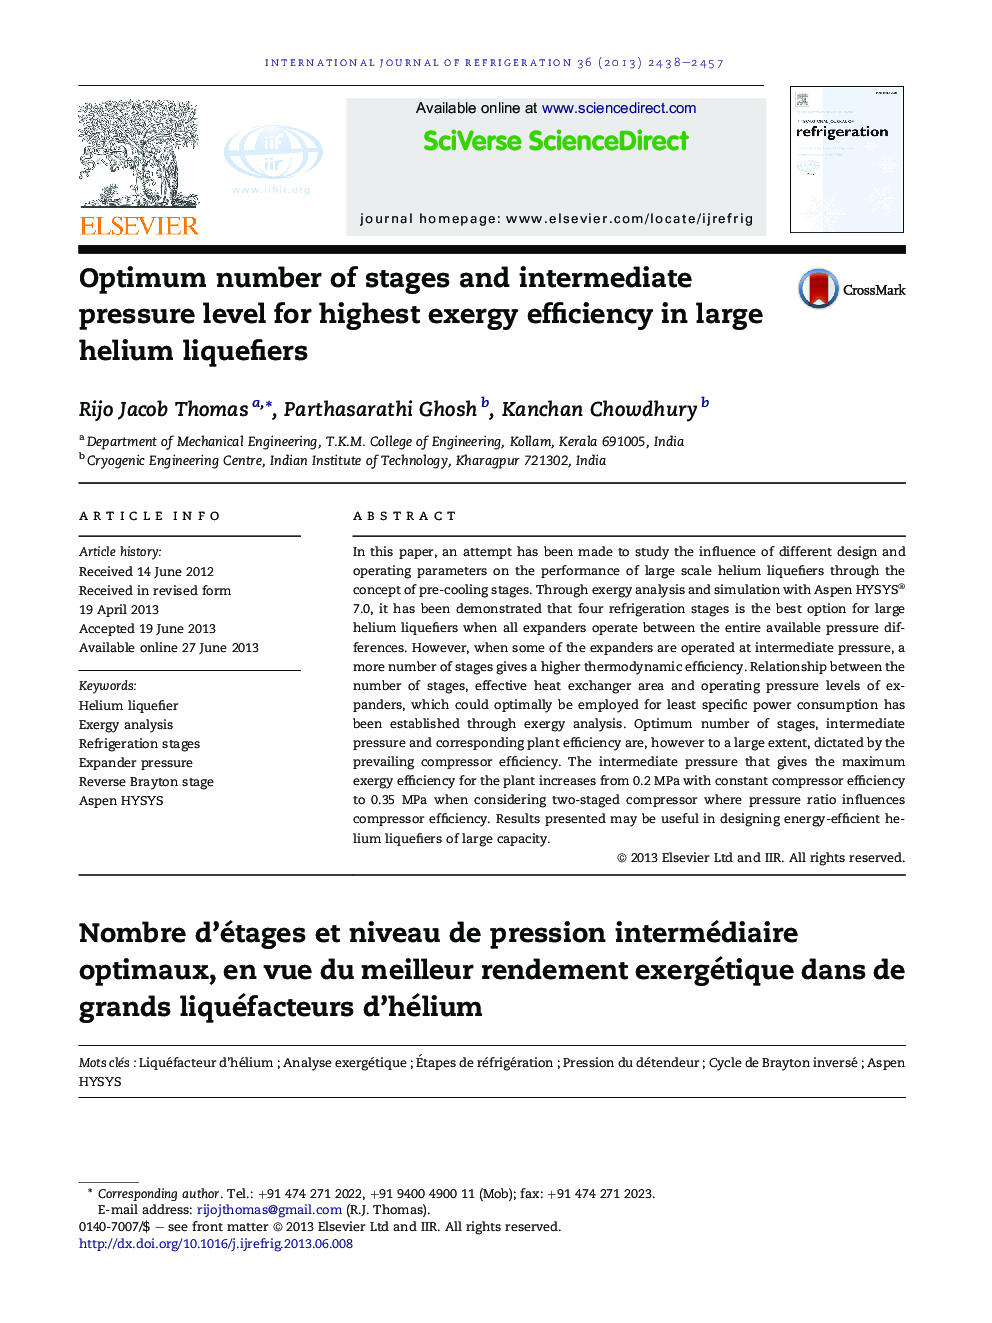 Optimum number of stages and intermediate pressure level for highest exergy efficiency in large helium liquefiers